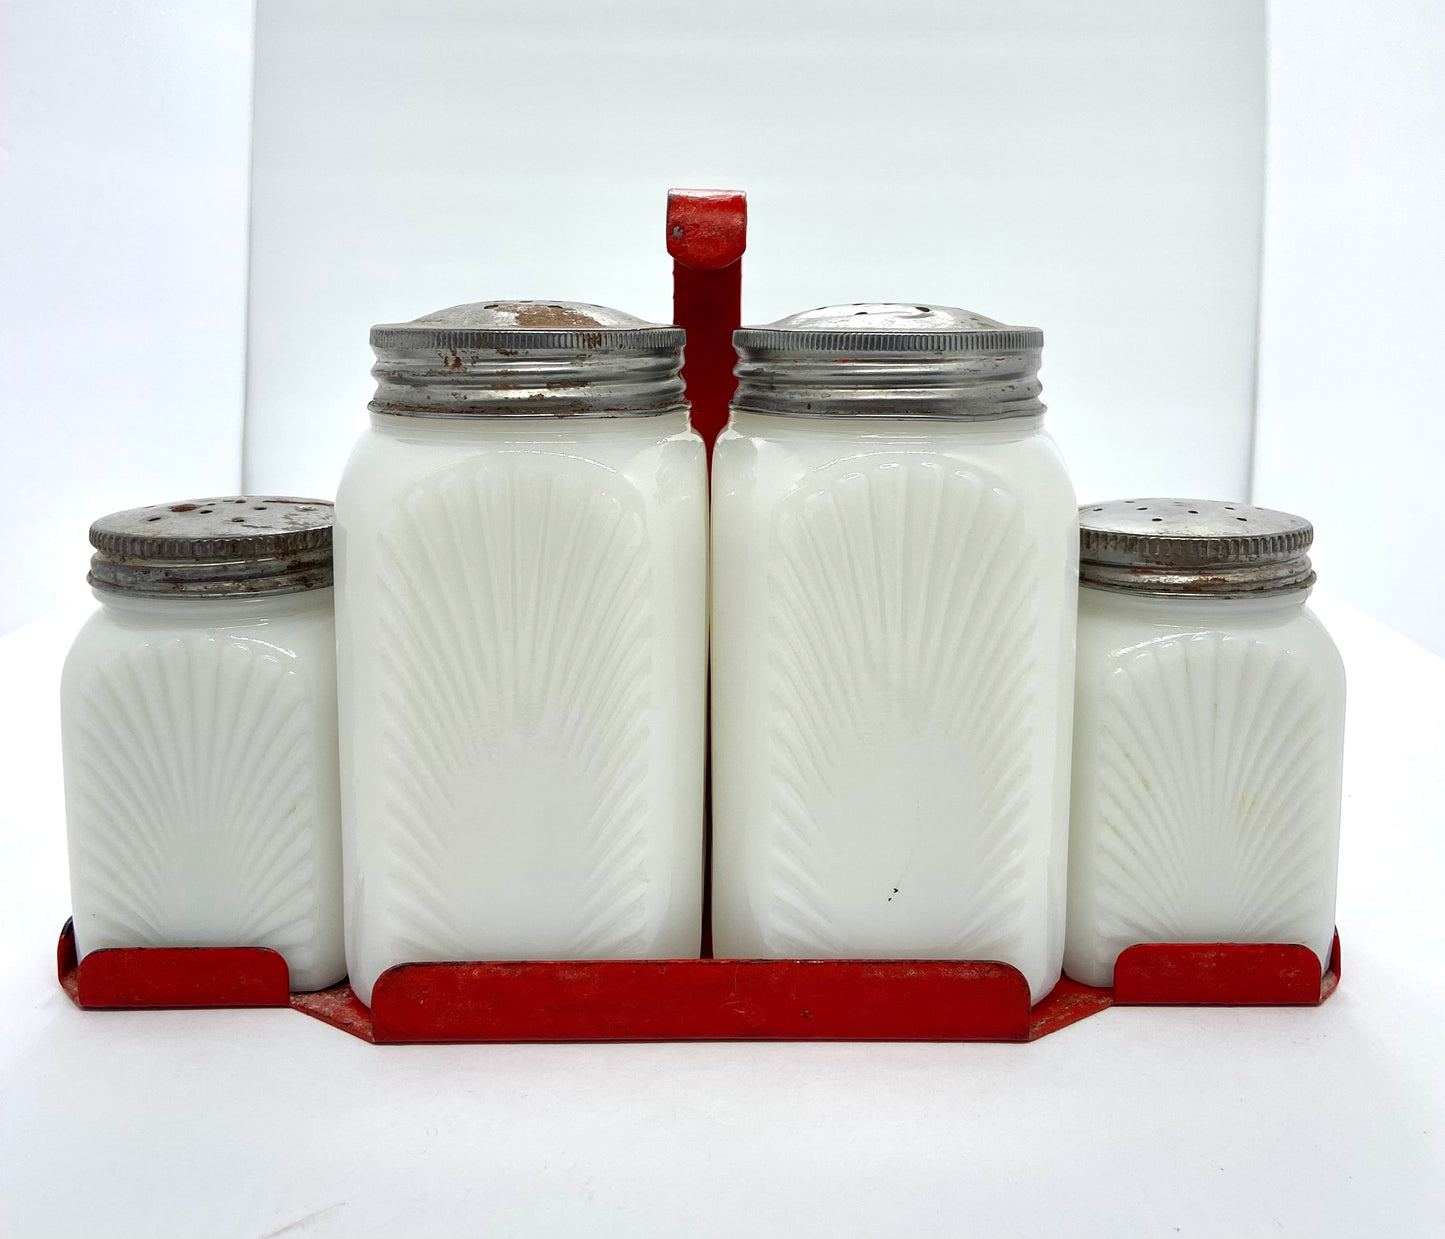 Rare Set of 4 Milk Glass Spice Jars with Salt & Pepper Shakers in Hangable Red Candy